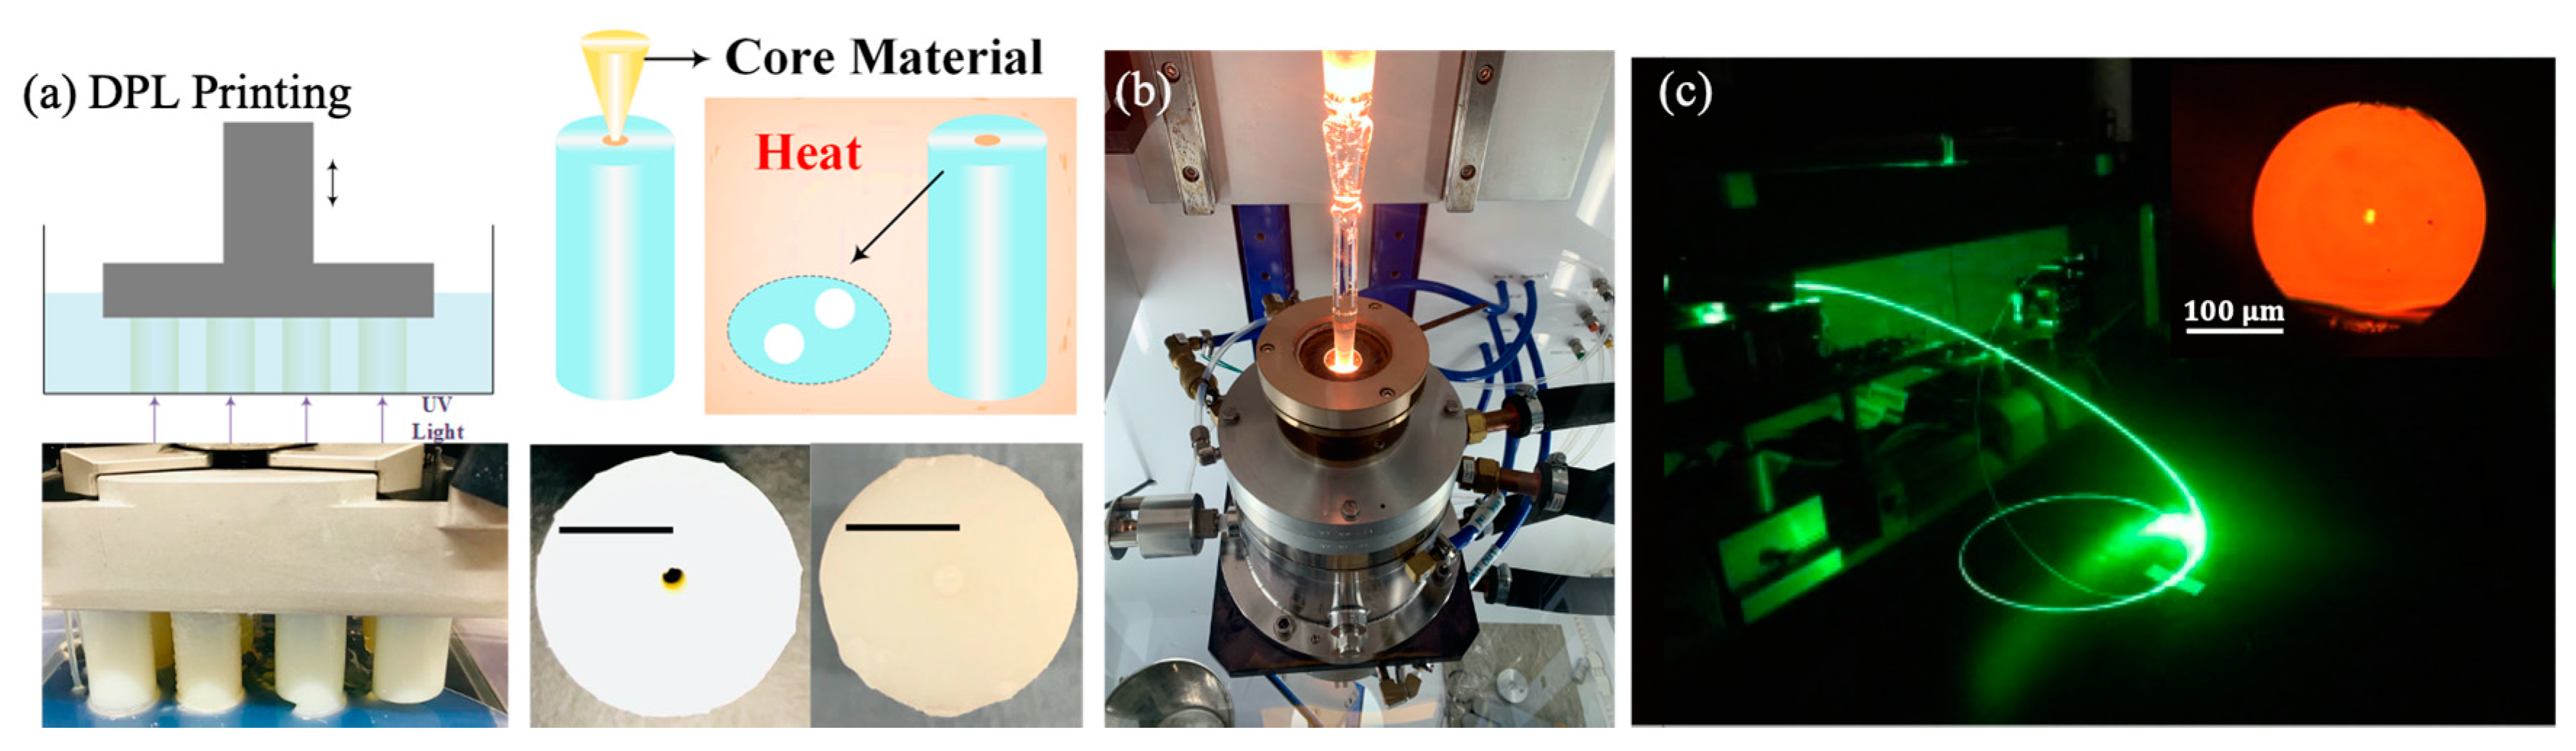 Applied Sciences | Free Full-Text | Thermal Stability of Type II  Modifications Inscribed by Femtosecond Laser in a Fiber Drawn from a 3D  Printed Preform